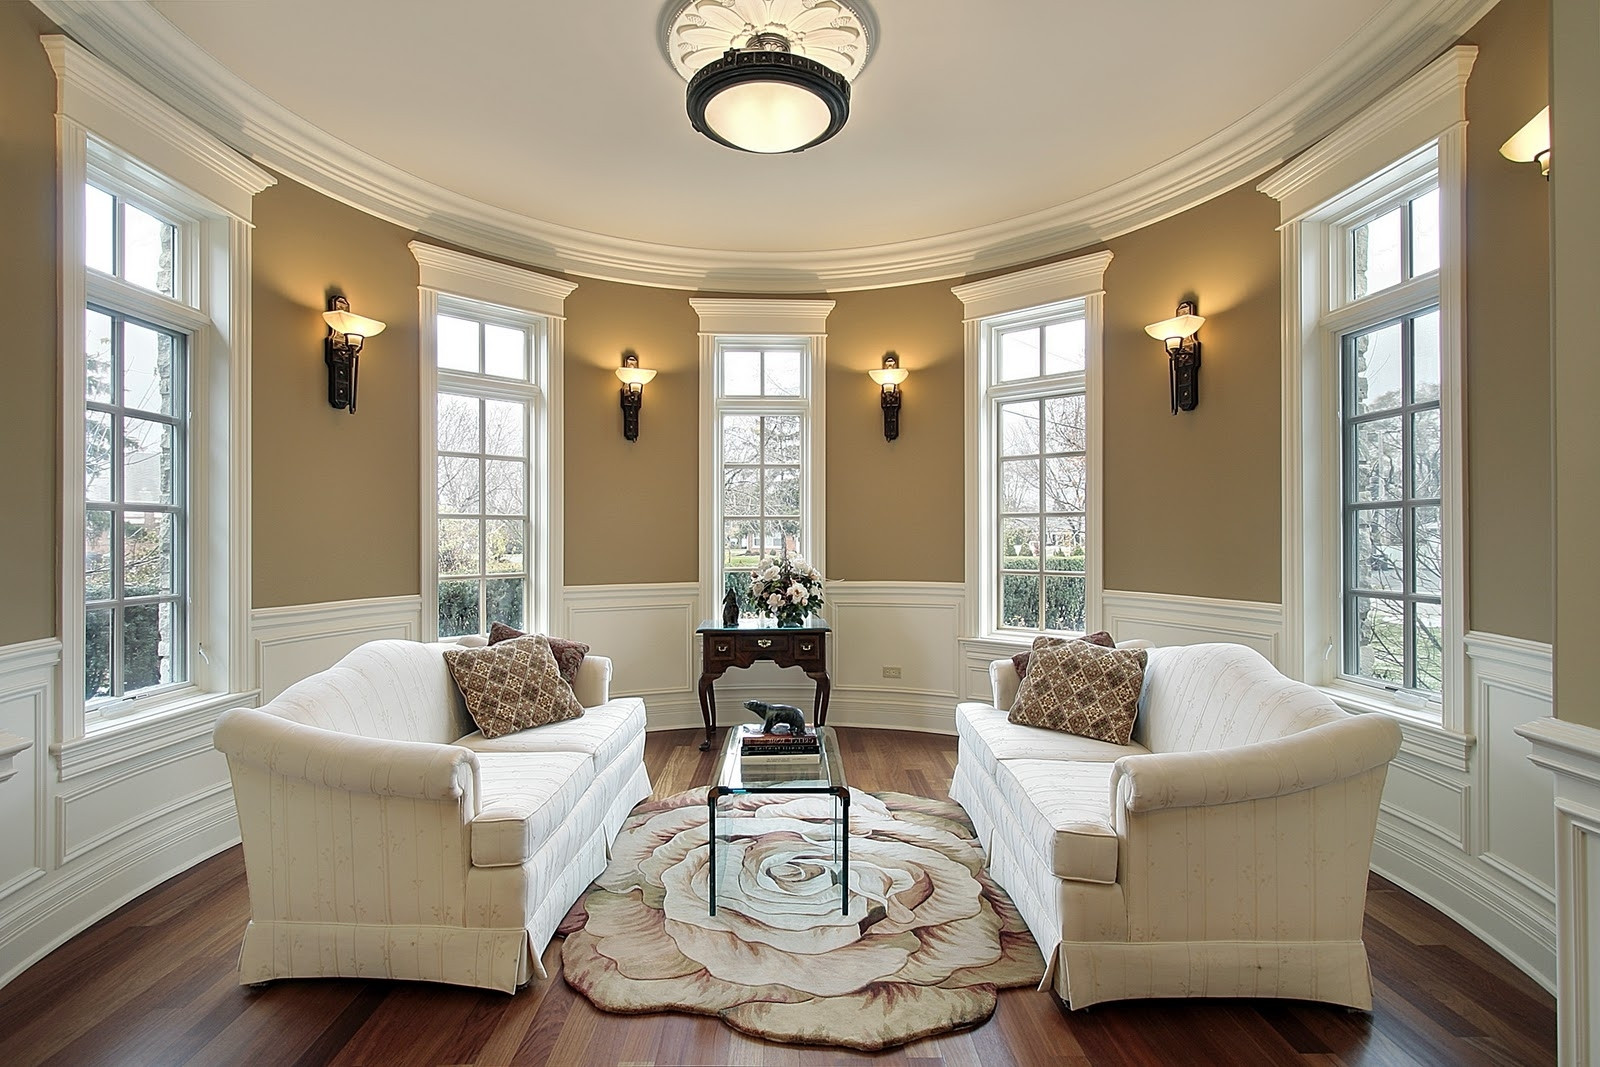 Ceiling Lights For Living Room
 5 Top Tips For The Best Light Fixtures